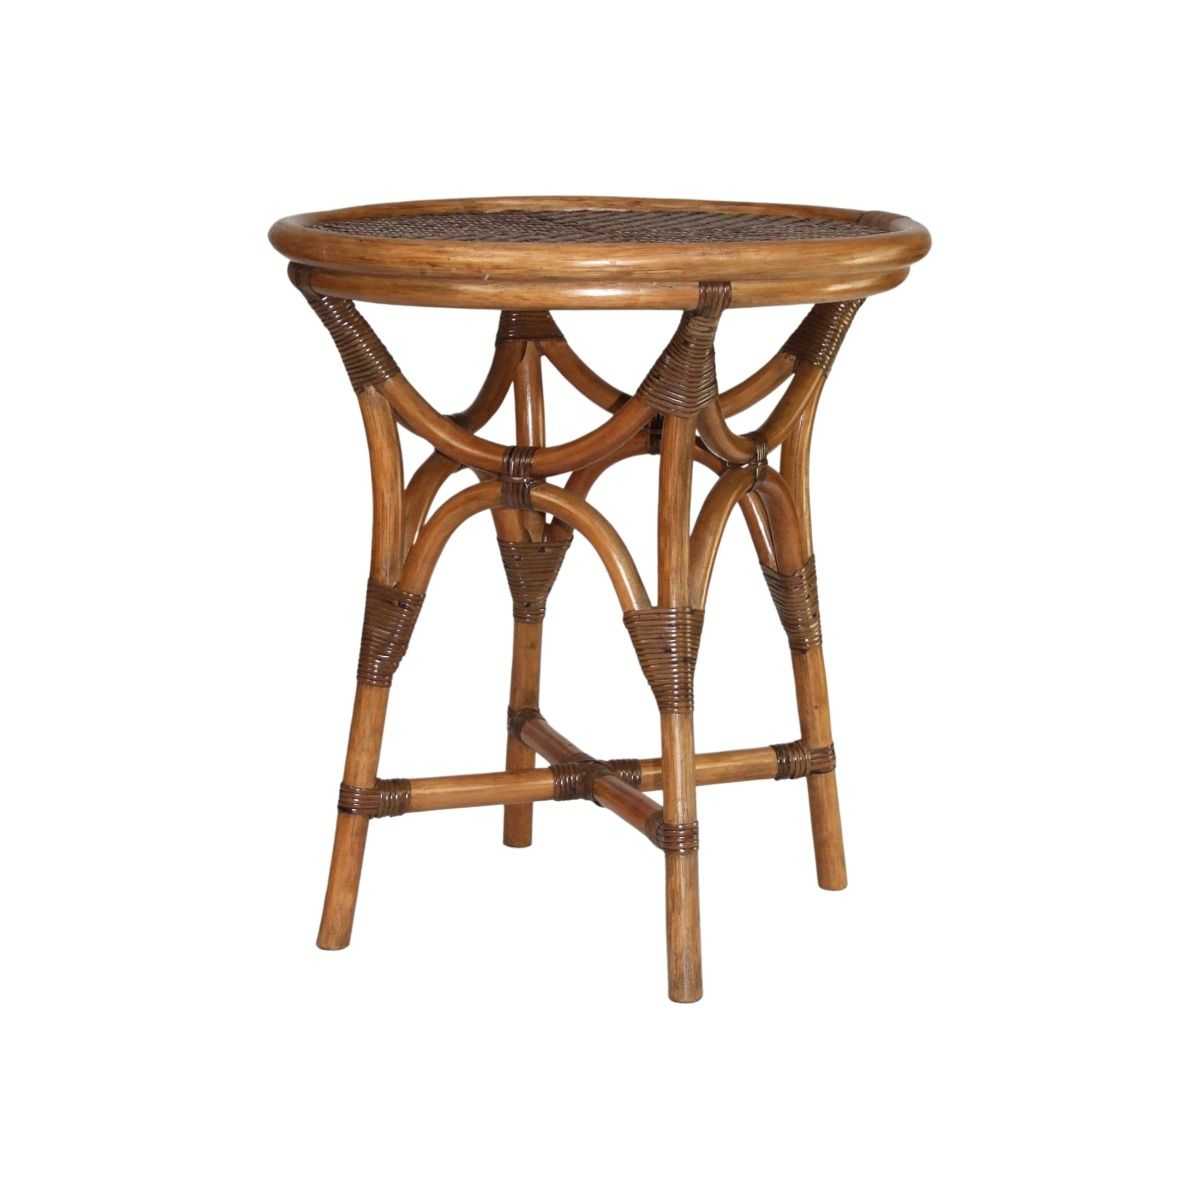 CR Conner Ratten Side Table